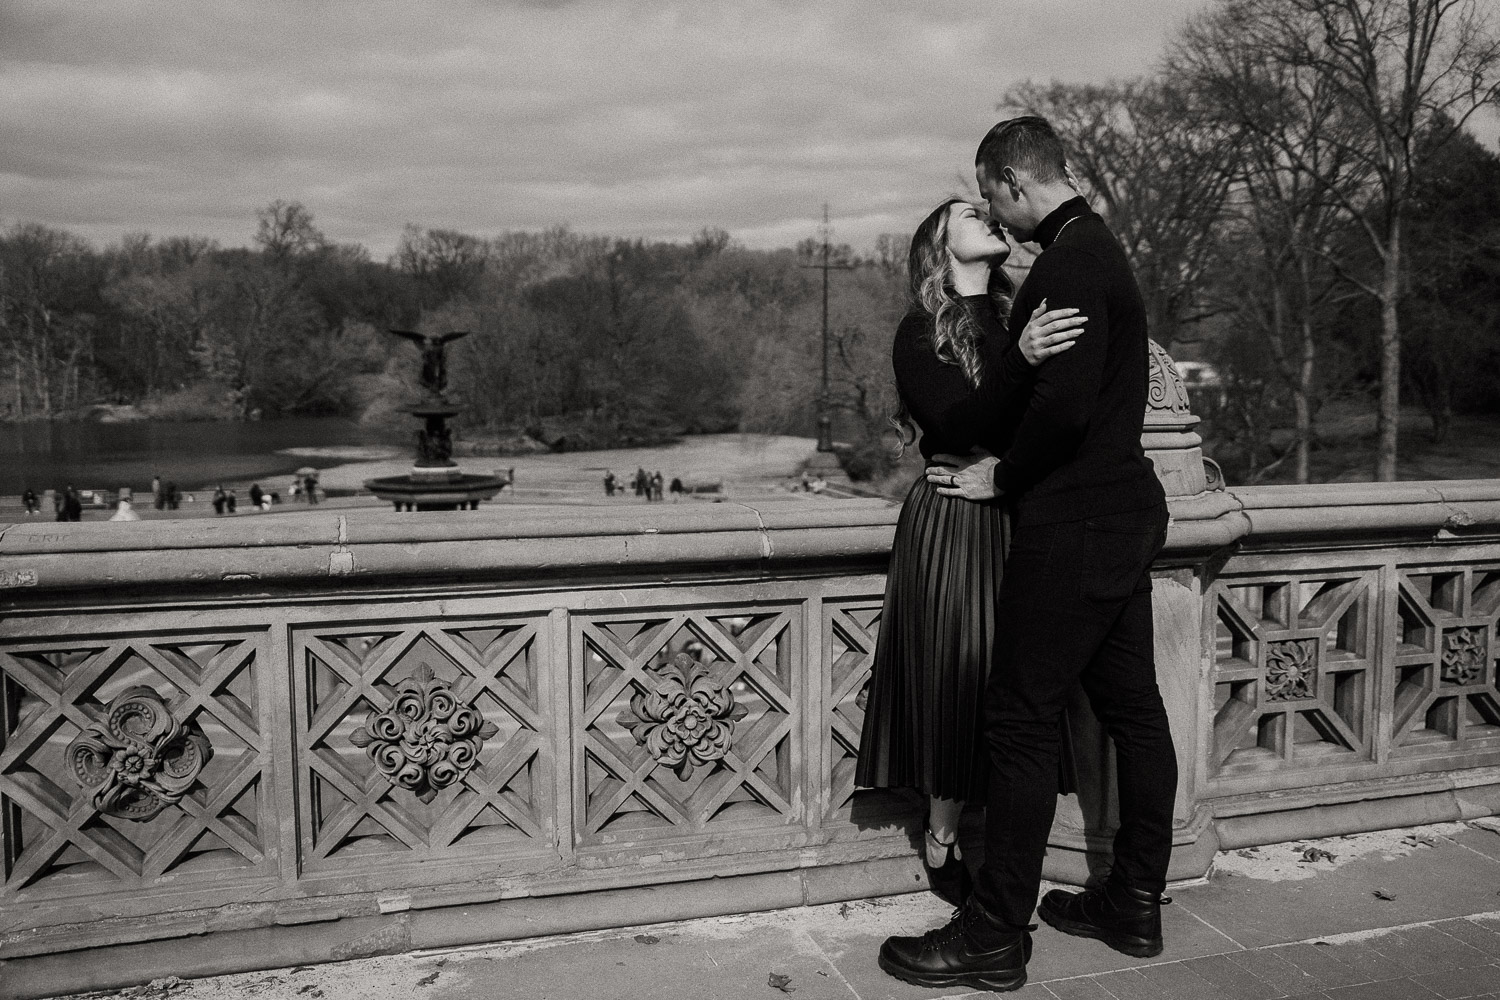 Elegant and stylish couples photography in Central Park. New York City photoshoot at Bethesda Terrace.